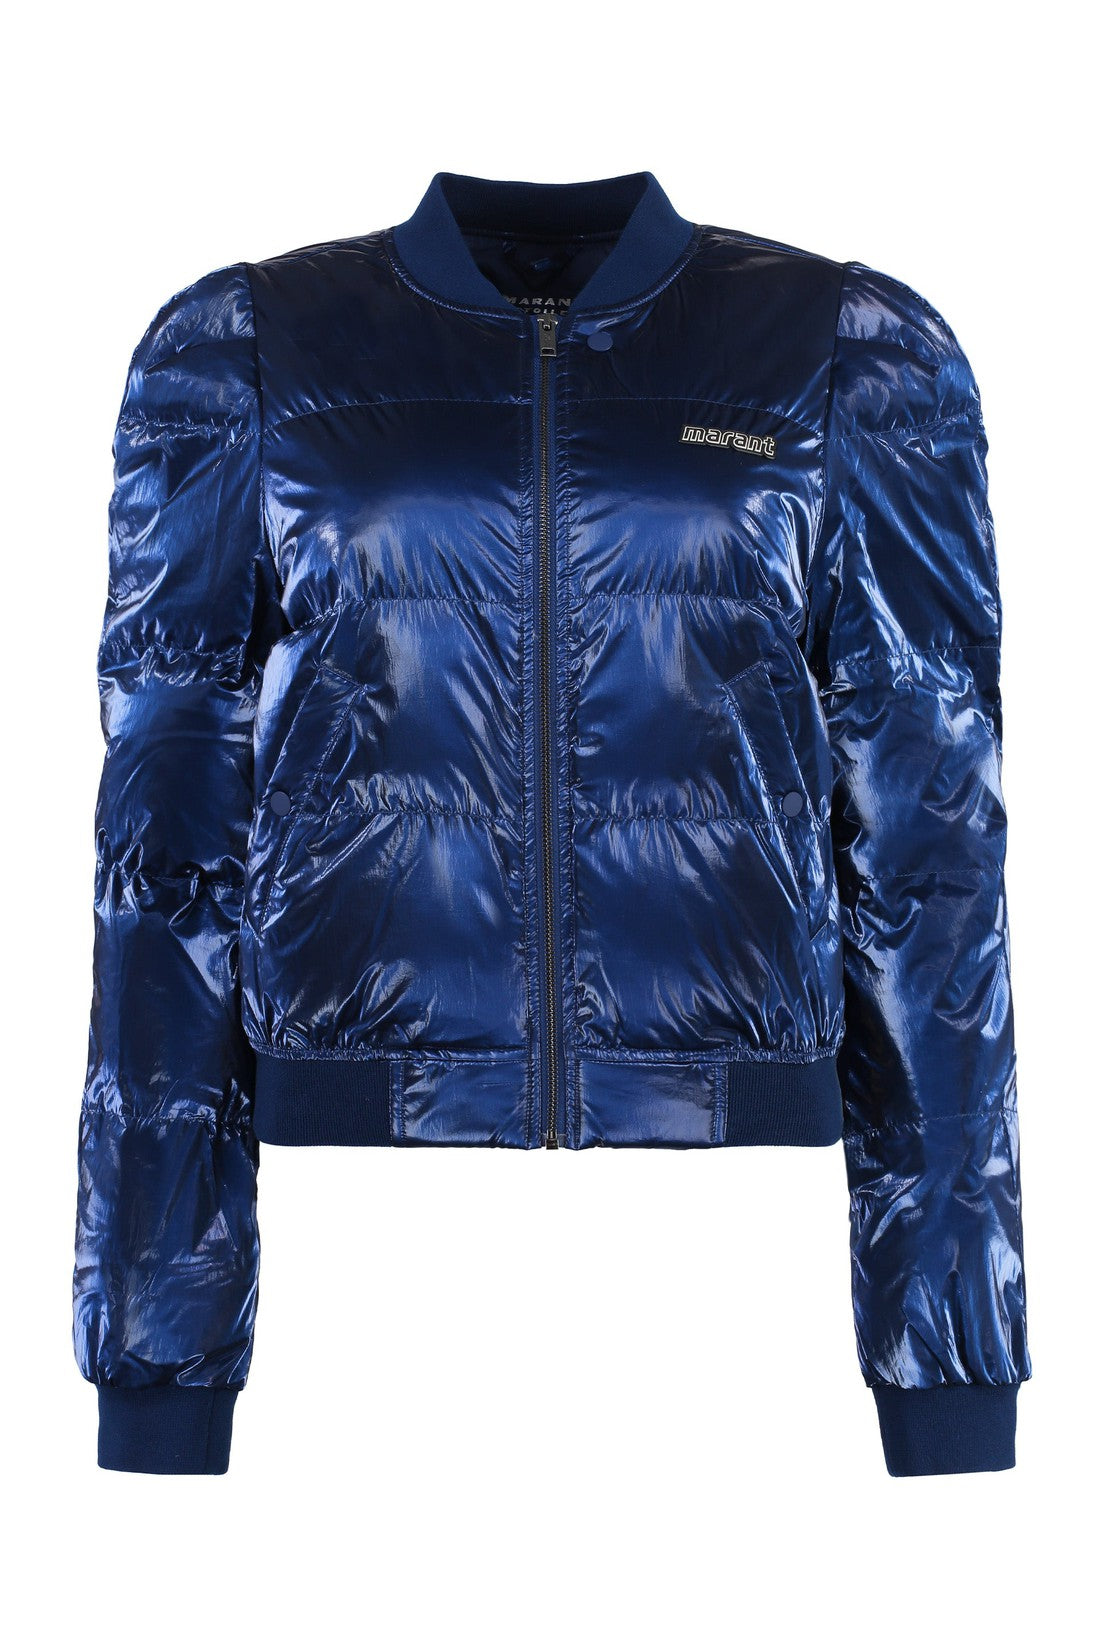 Marant étoile-OUTLET-SALE-Cody bomber jacket in technical fabric-ARCHIVIST